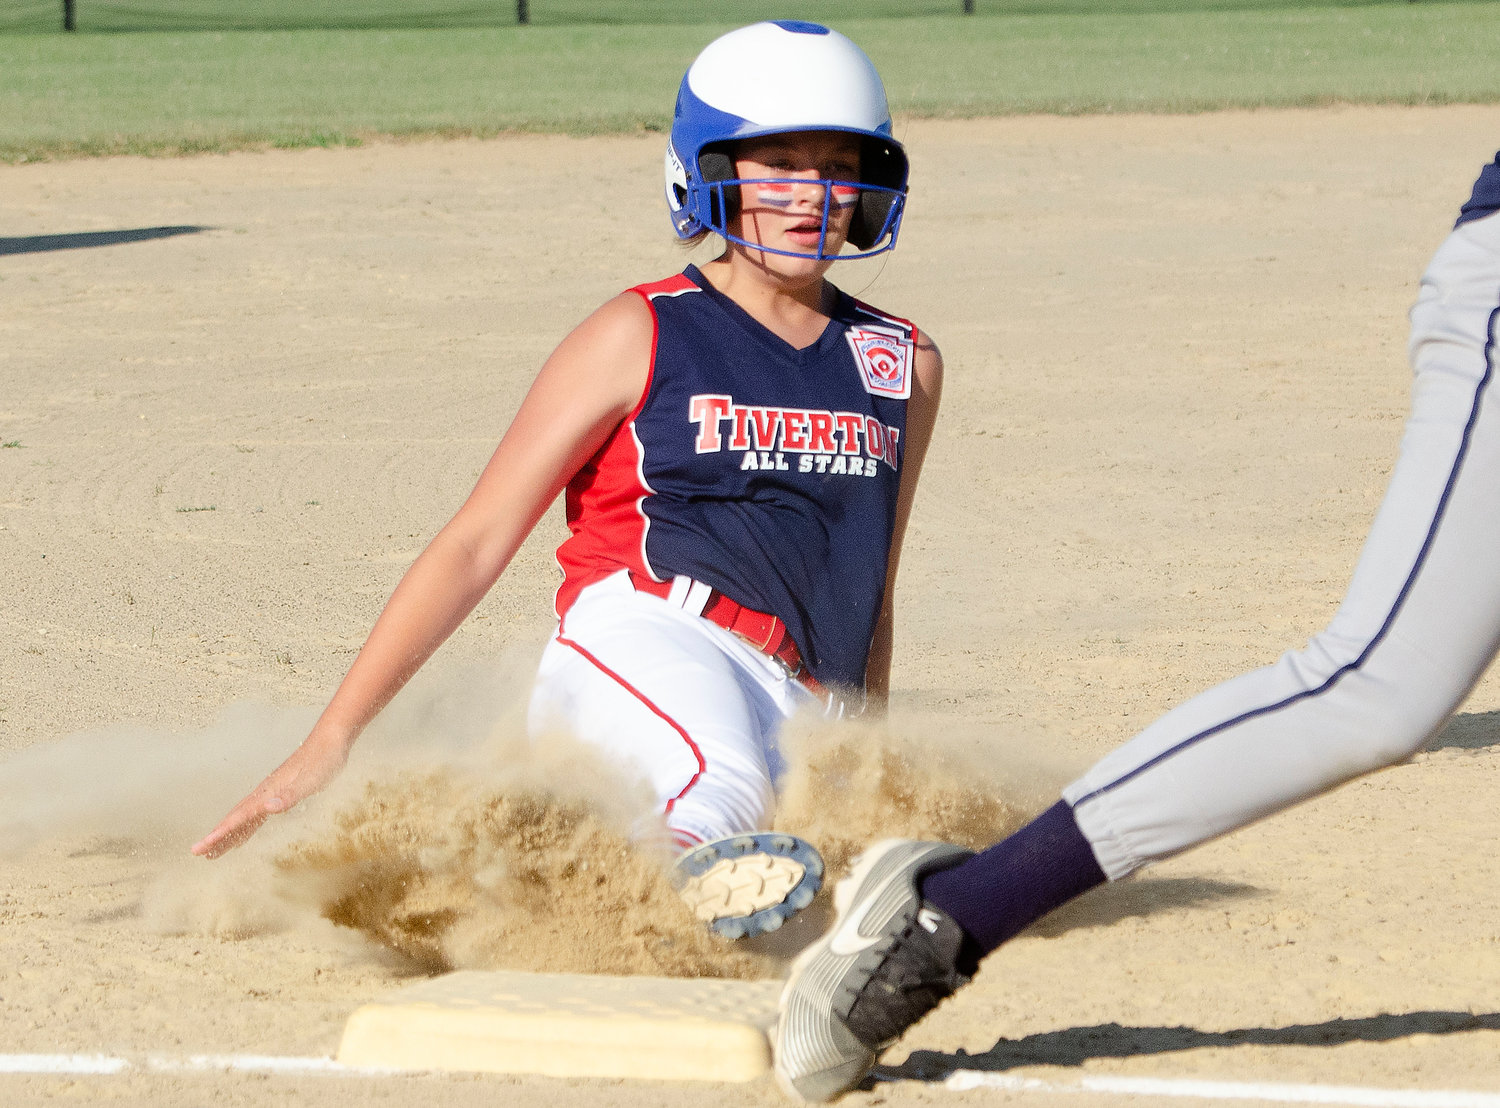 Brooke Sowa slides into third base safely in the first inning.